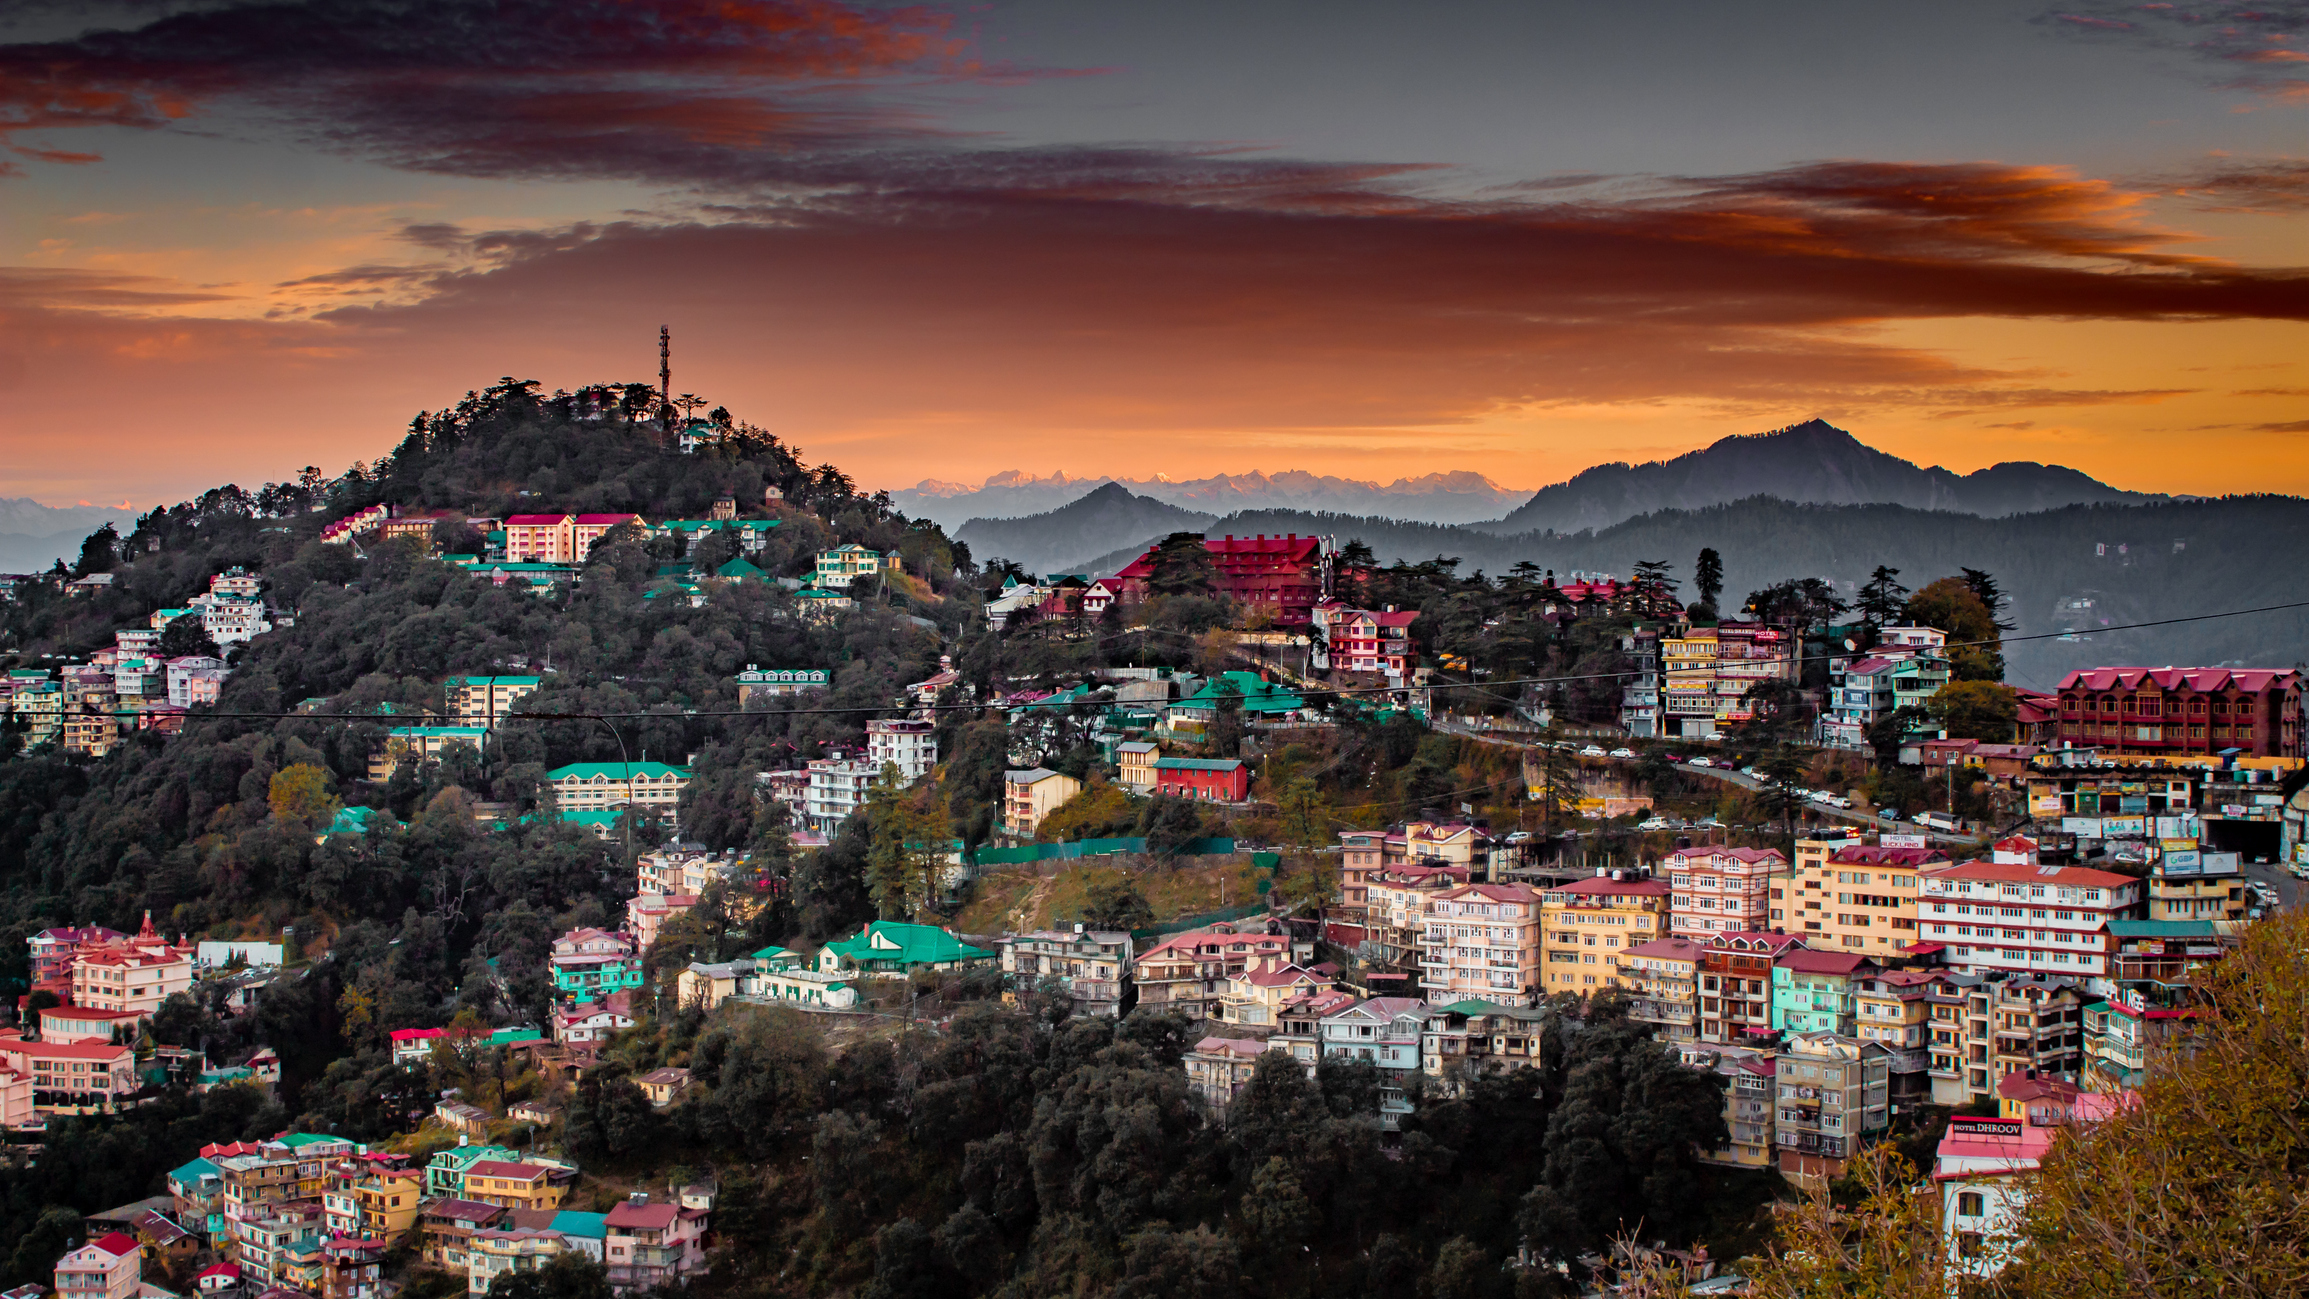 Experience extraordinary Indian sights like this sunset over Shimla when you take a tailor-made holiday with Alfred&.